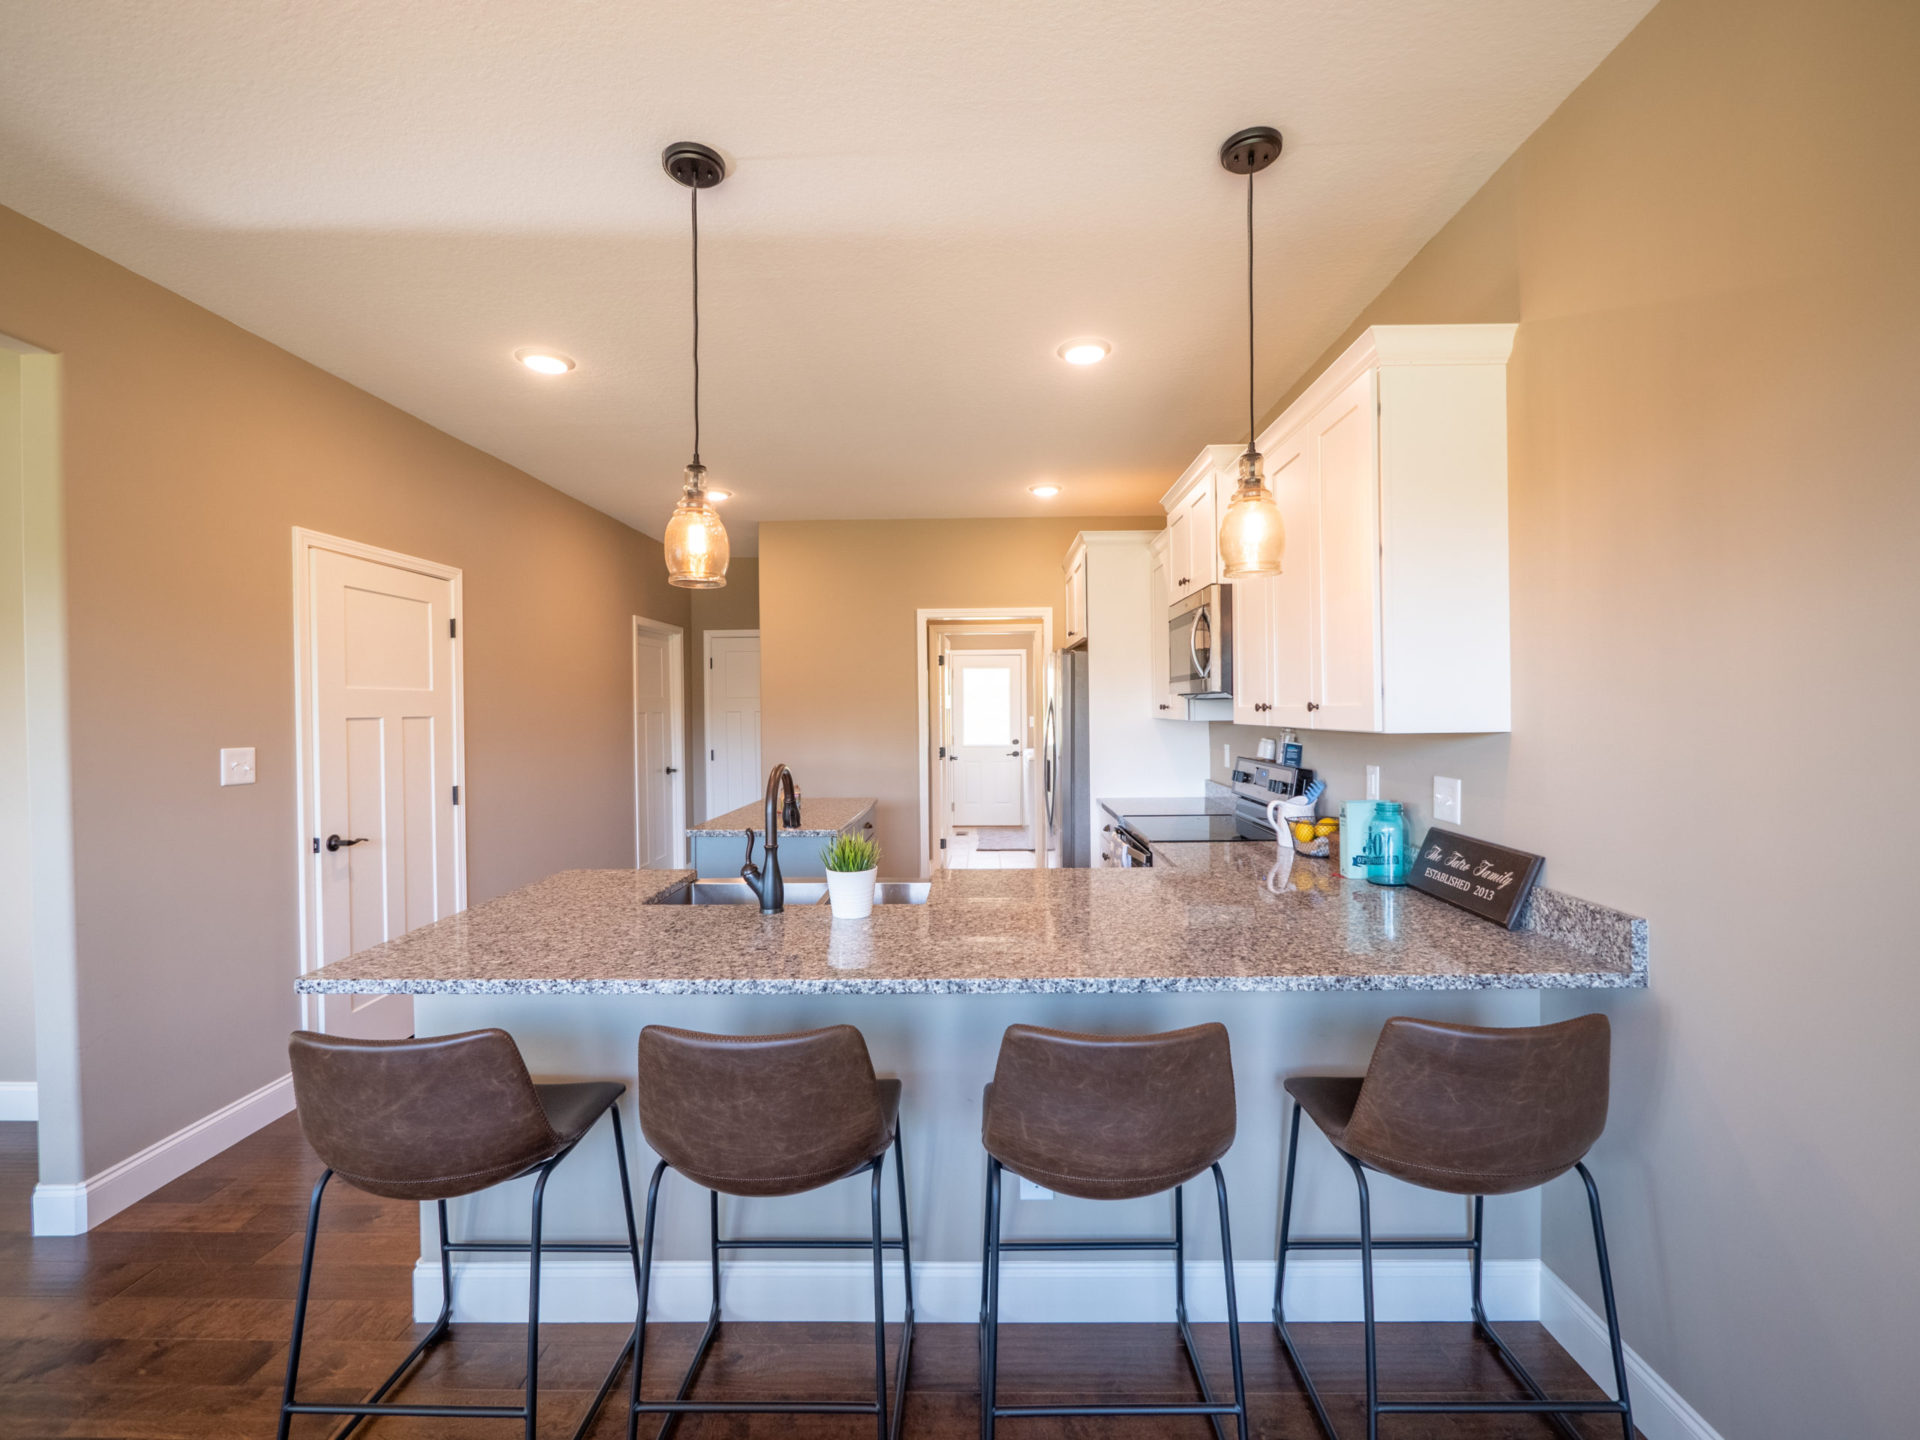 Real Estate Photography of Interior Kitchen